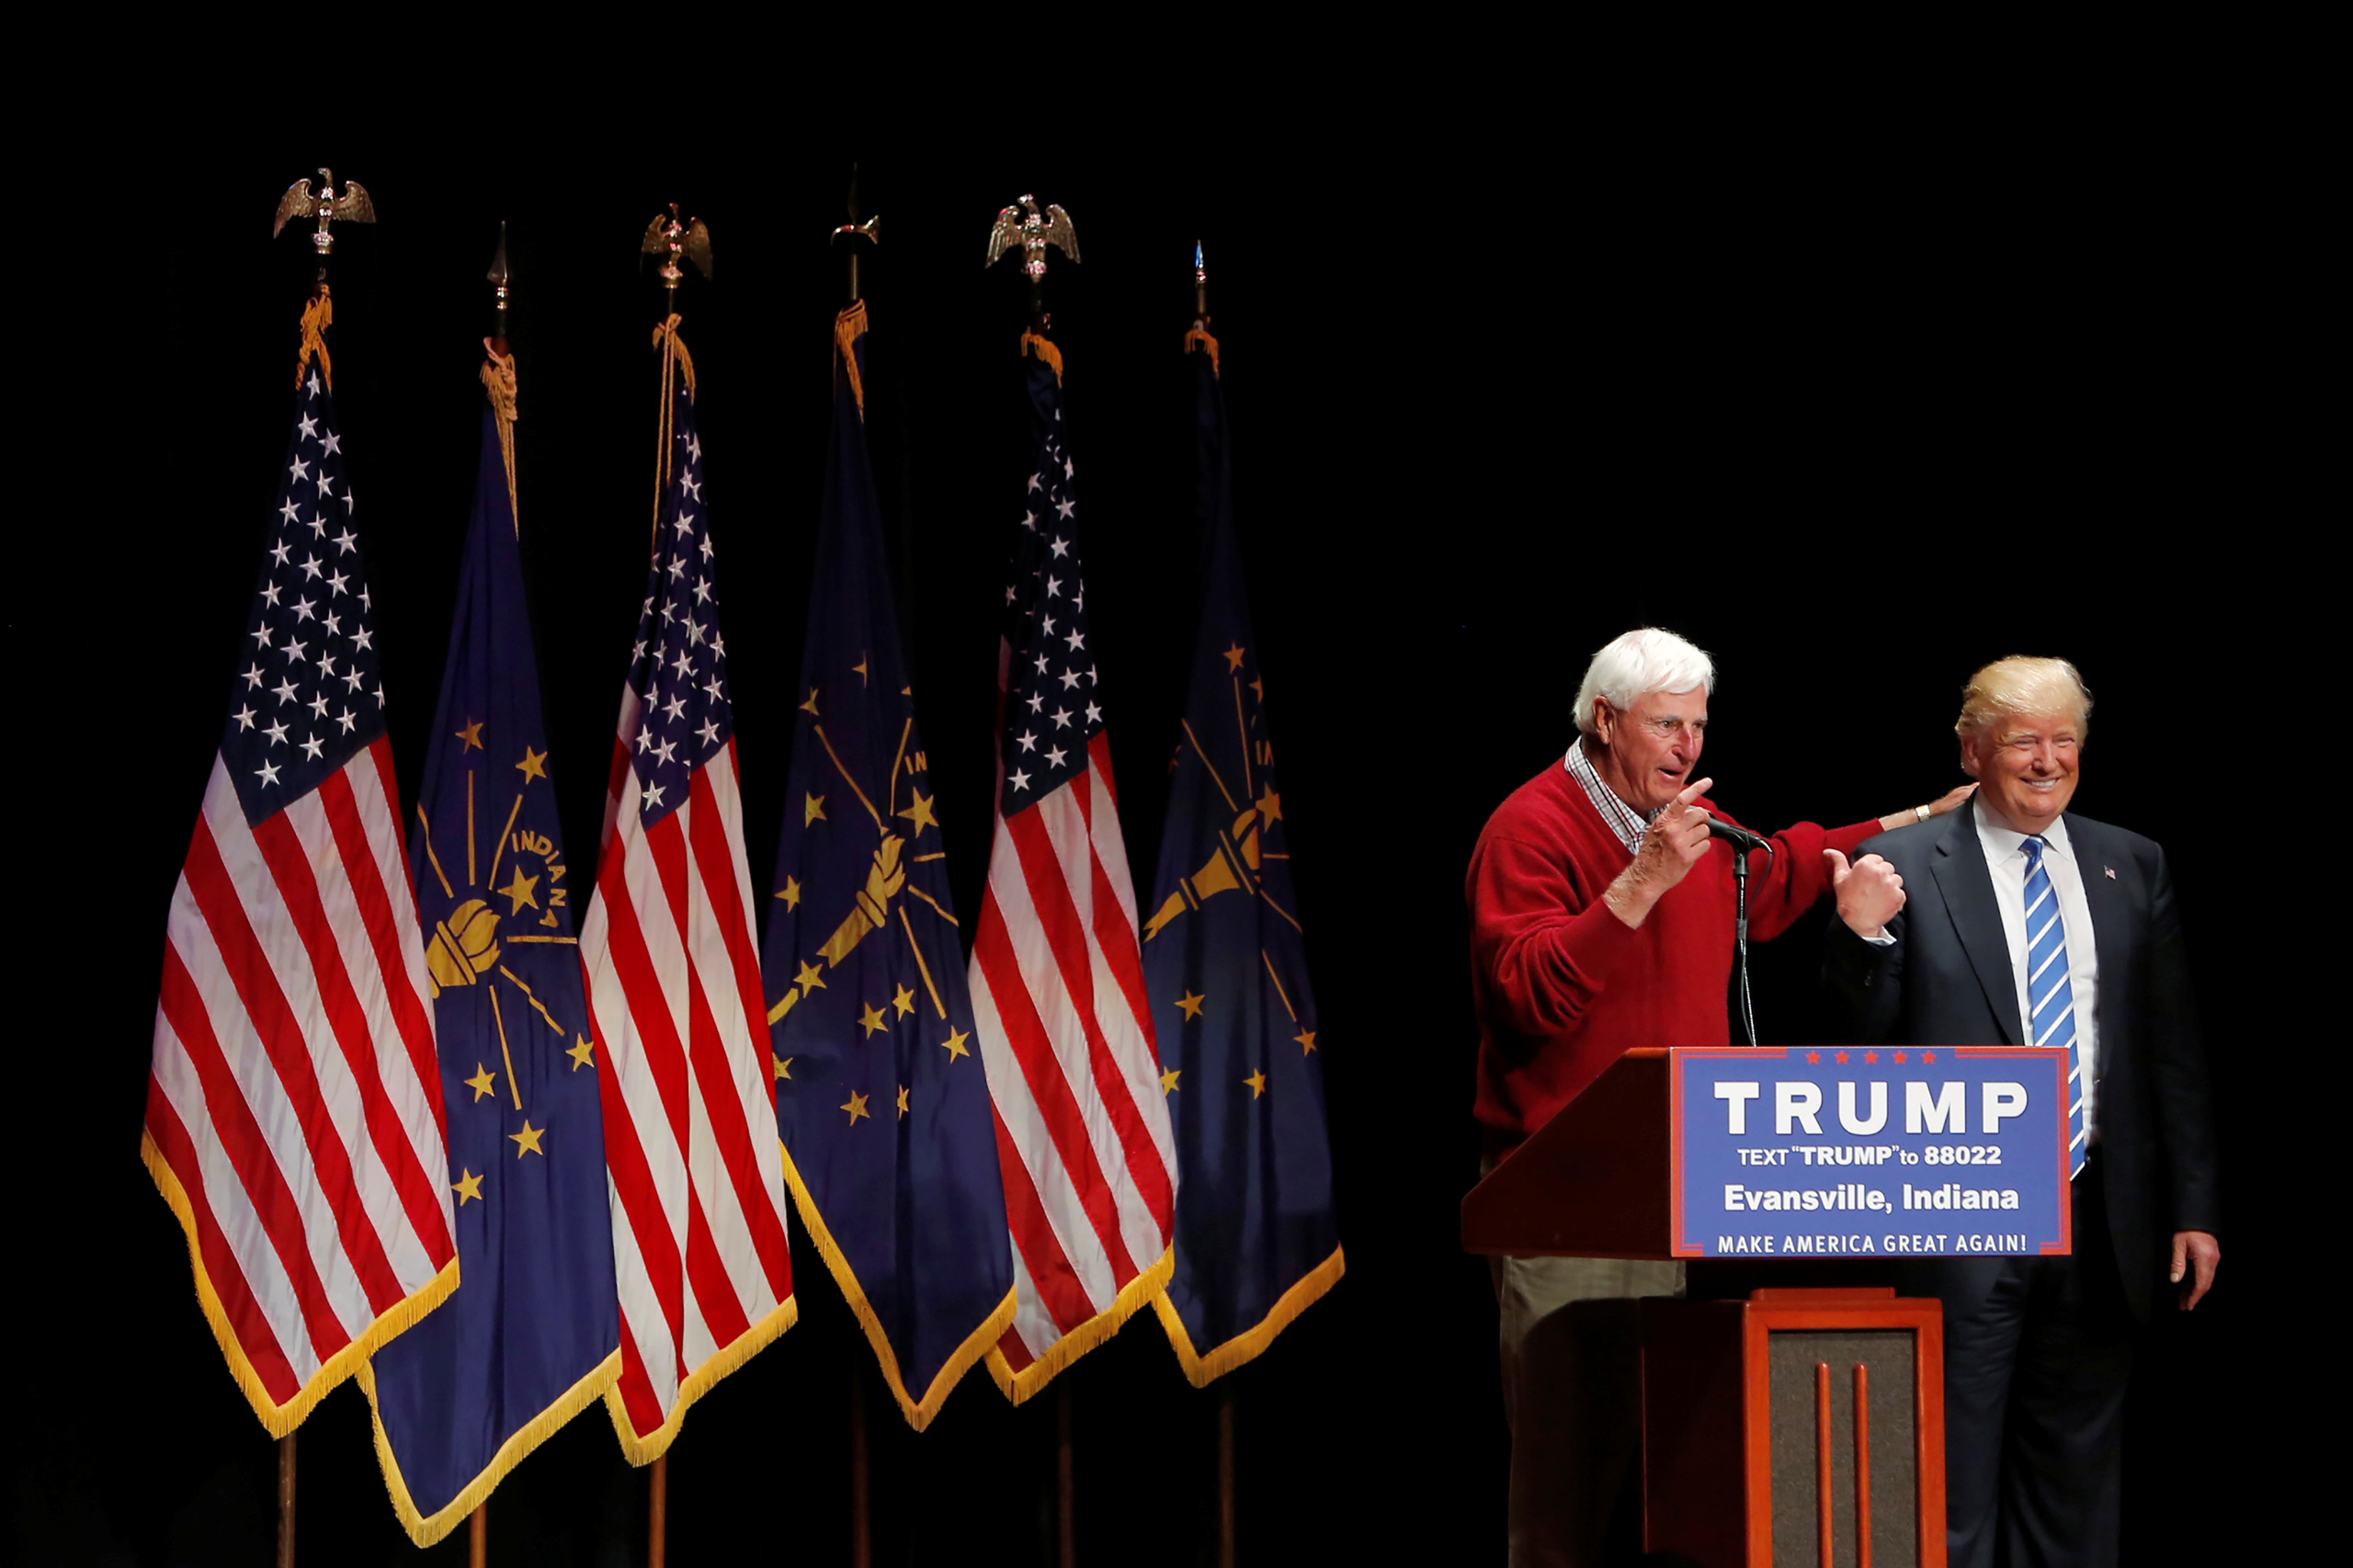 Republican presidential candidate Donald Trump is joined on stage by former Indiana University basketball coach Bob Knight at a campaign event at the Old National Events Plaza in Evansville, Indiana, on April 28, 2016. (Aaron Bernstein—Reuters)